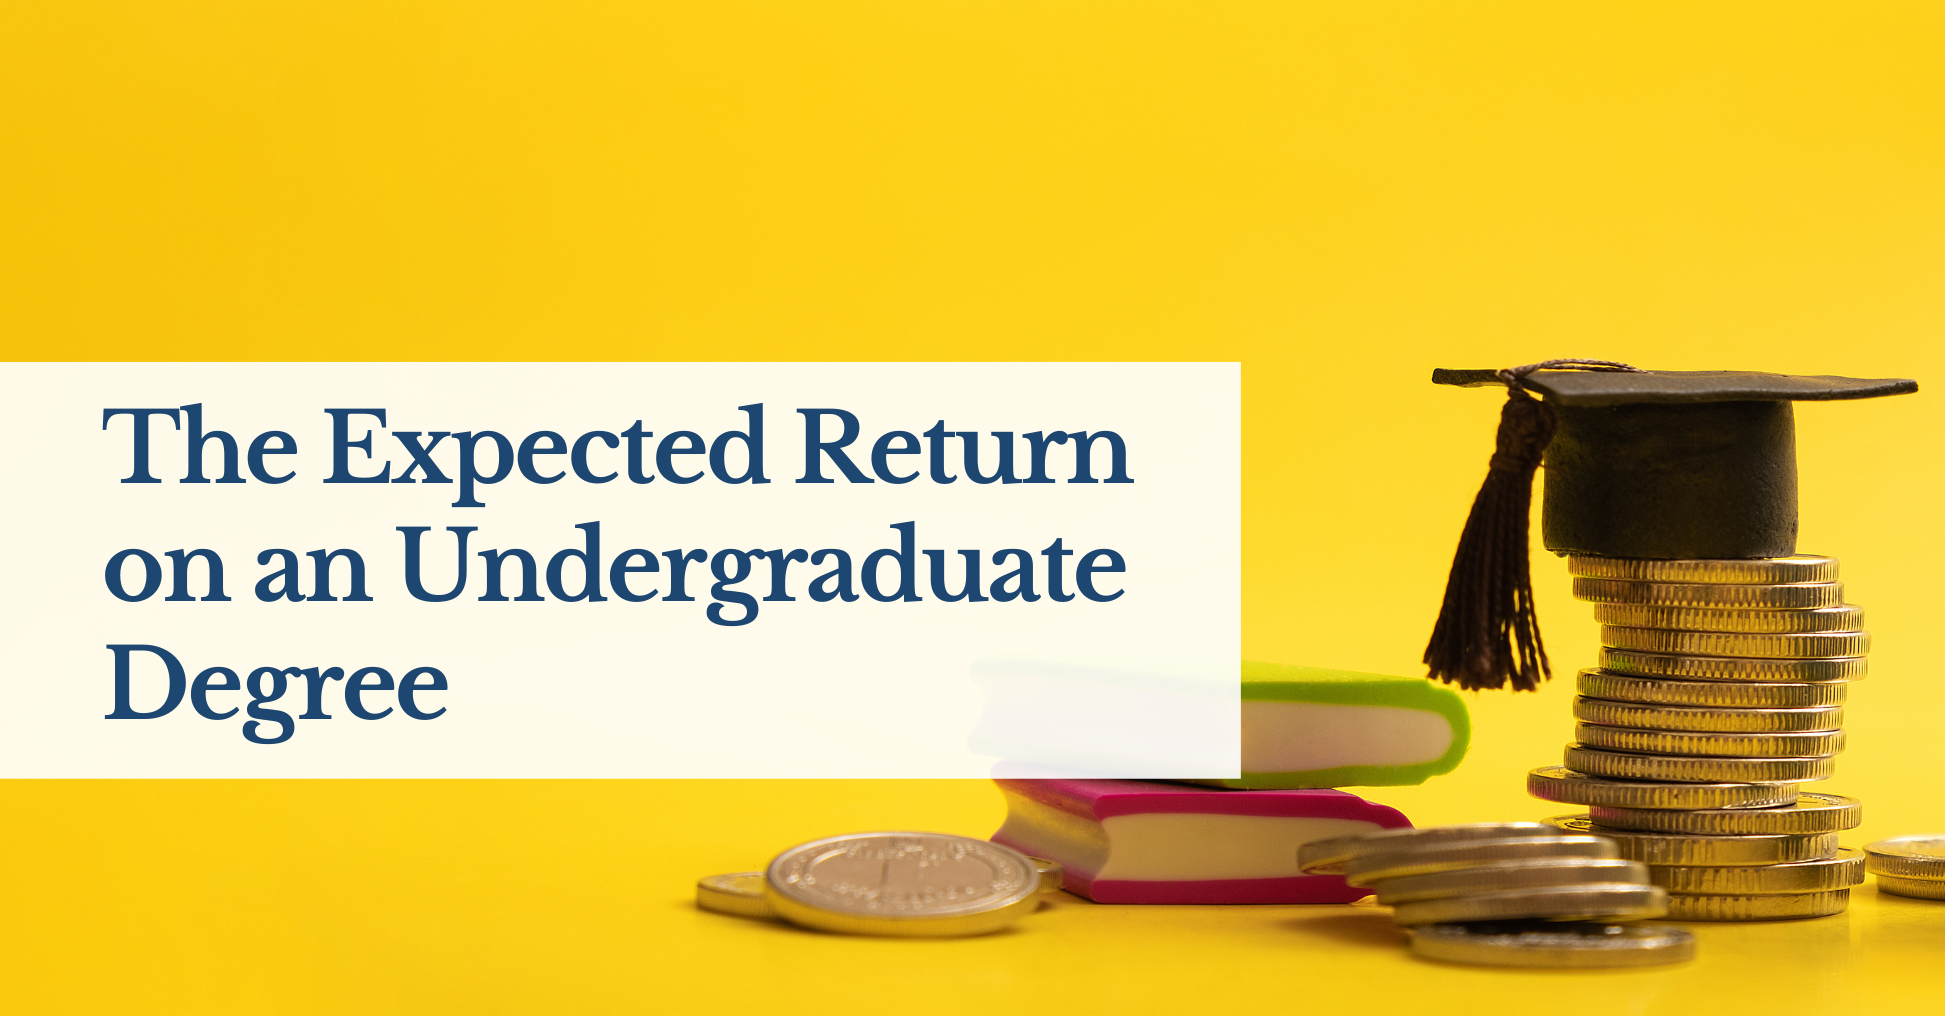 The Expected Return on an Undergraduate Degree